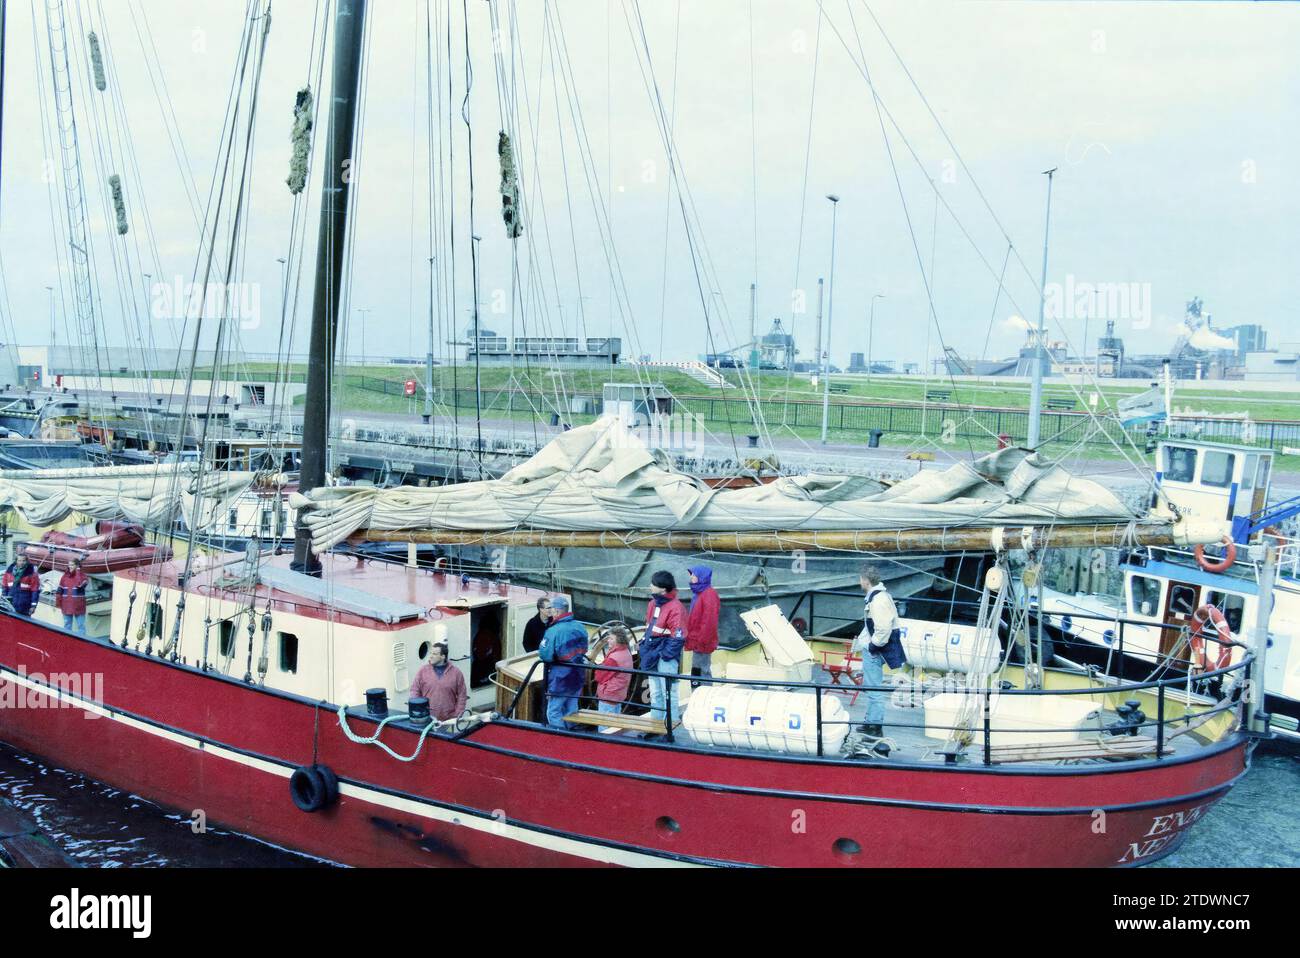 Sailing ship Noorderlicht, IJmuiden locks, IJmuiden, The Netherlands, 19-10-1997, Whizgle News from the Past, Tailored for the Future. Explore historical narratives, Dutch The Netherlands agency image with a modern perspective, bridging the gap between yesterday's events and tomorrow's insights. A timeless journey shaping the stories that shape our future Stock Photo